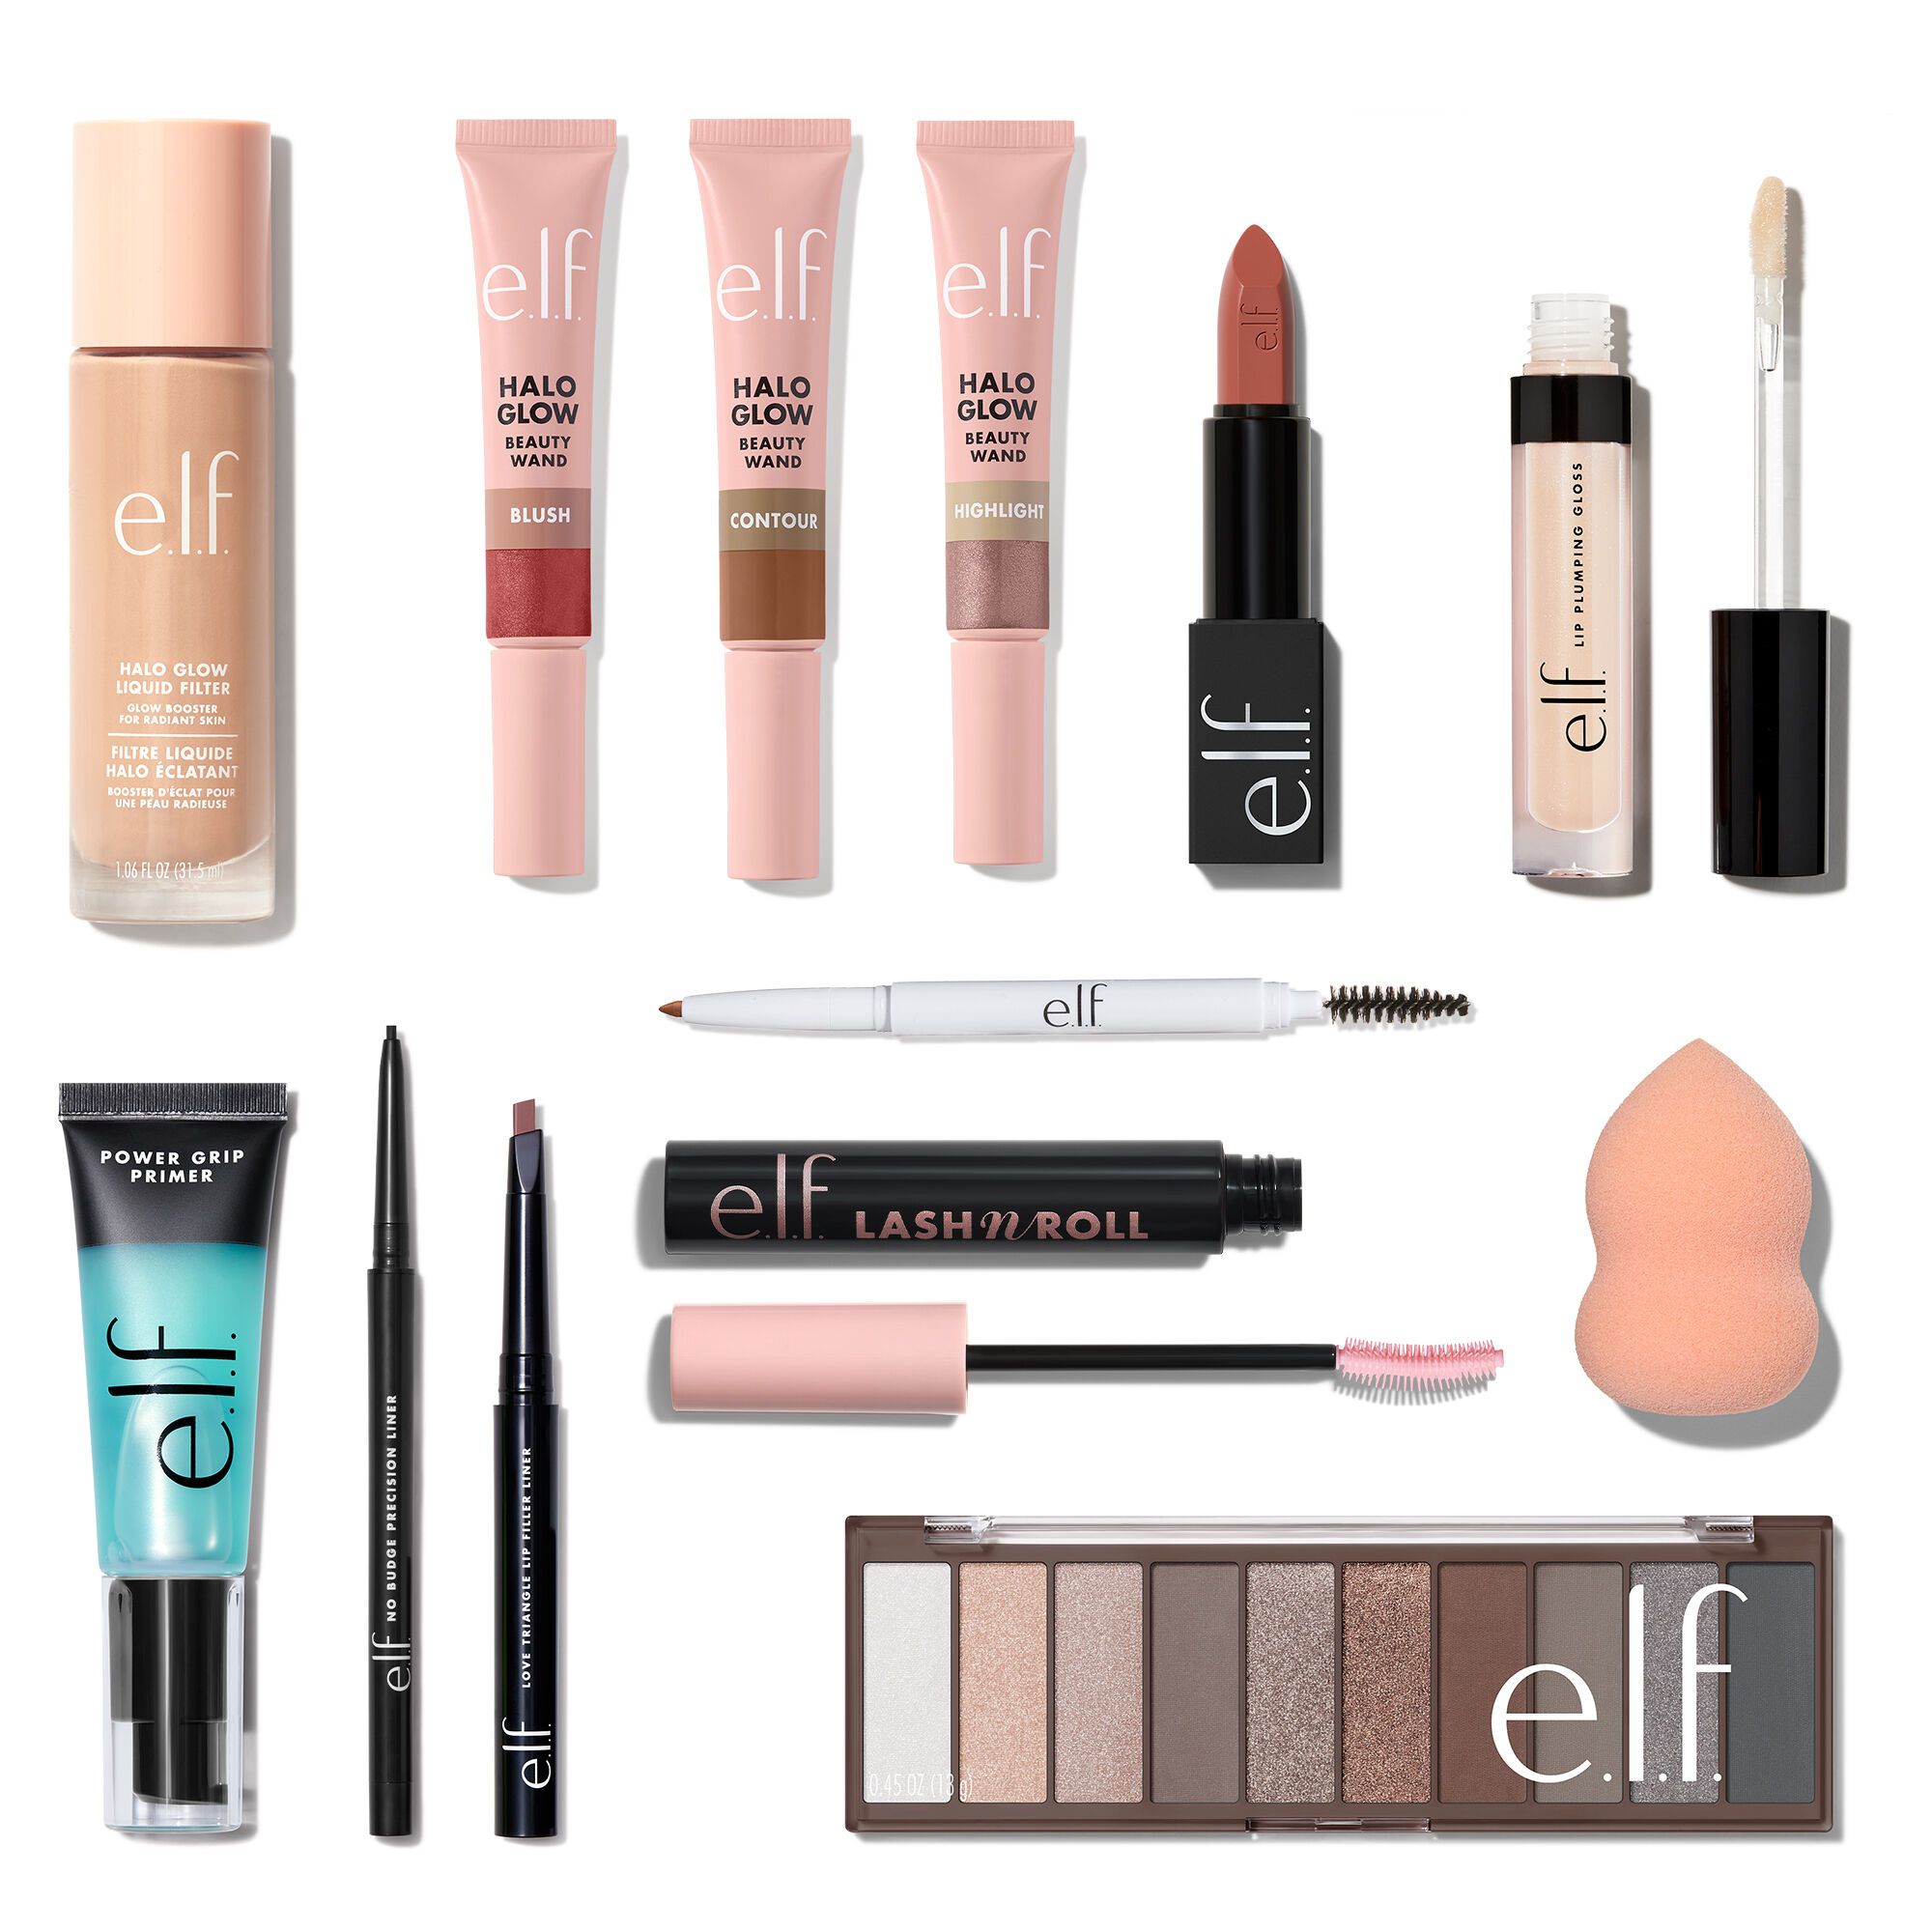  e.l.f. Halo Glow Liquid Filter, Complexion Booster For A Glowing,  Soft-Focus Look, Infused With Hyaluronic Acid, Vegan & Cruelty-Free, 5  Medium/Tan : Beauty & Personal Care